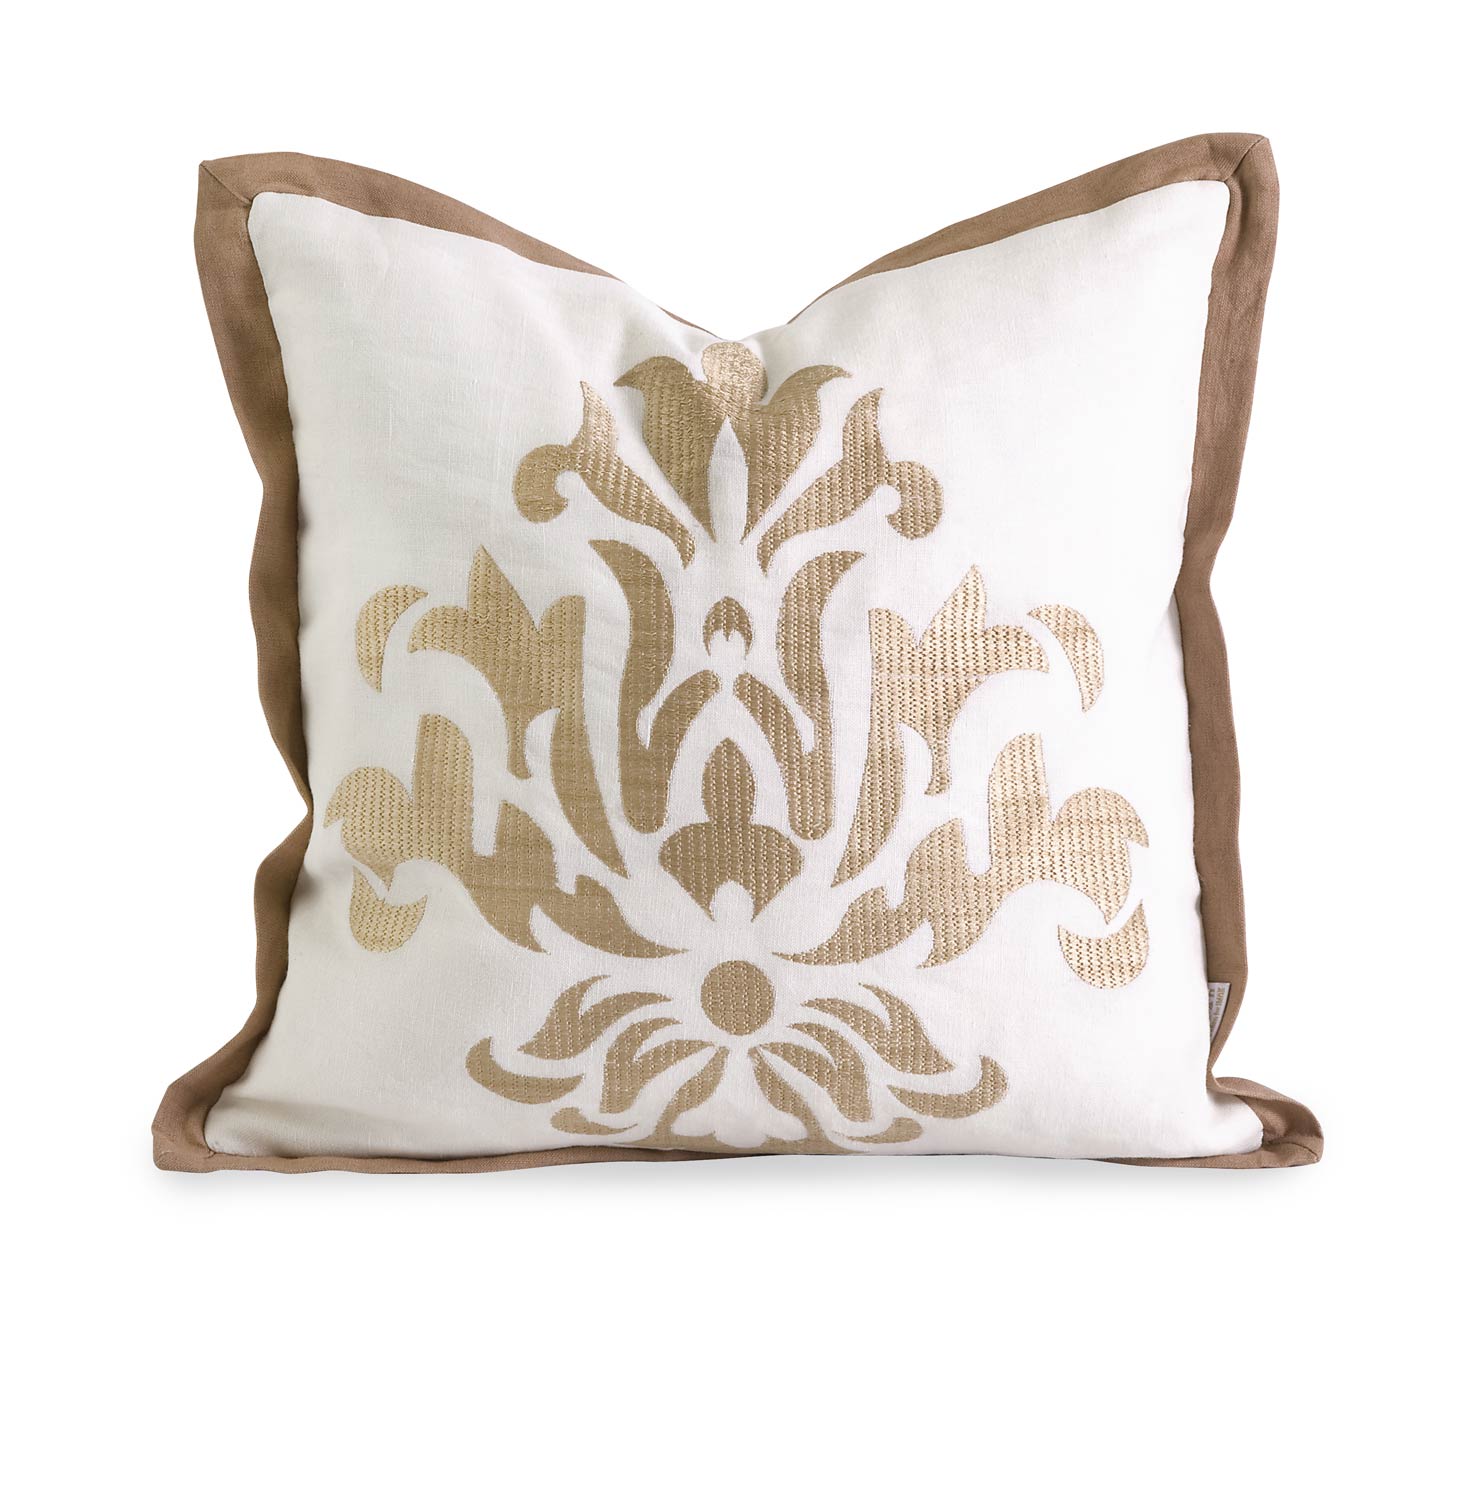 IMAX Ik Kassa Embroidered Pillow with Down Fill